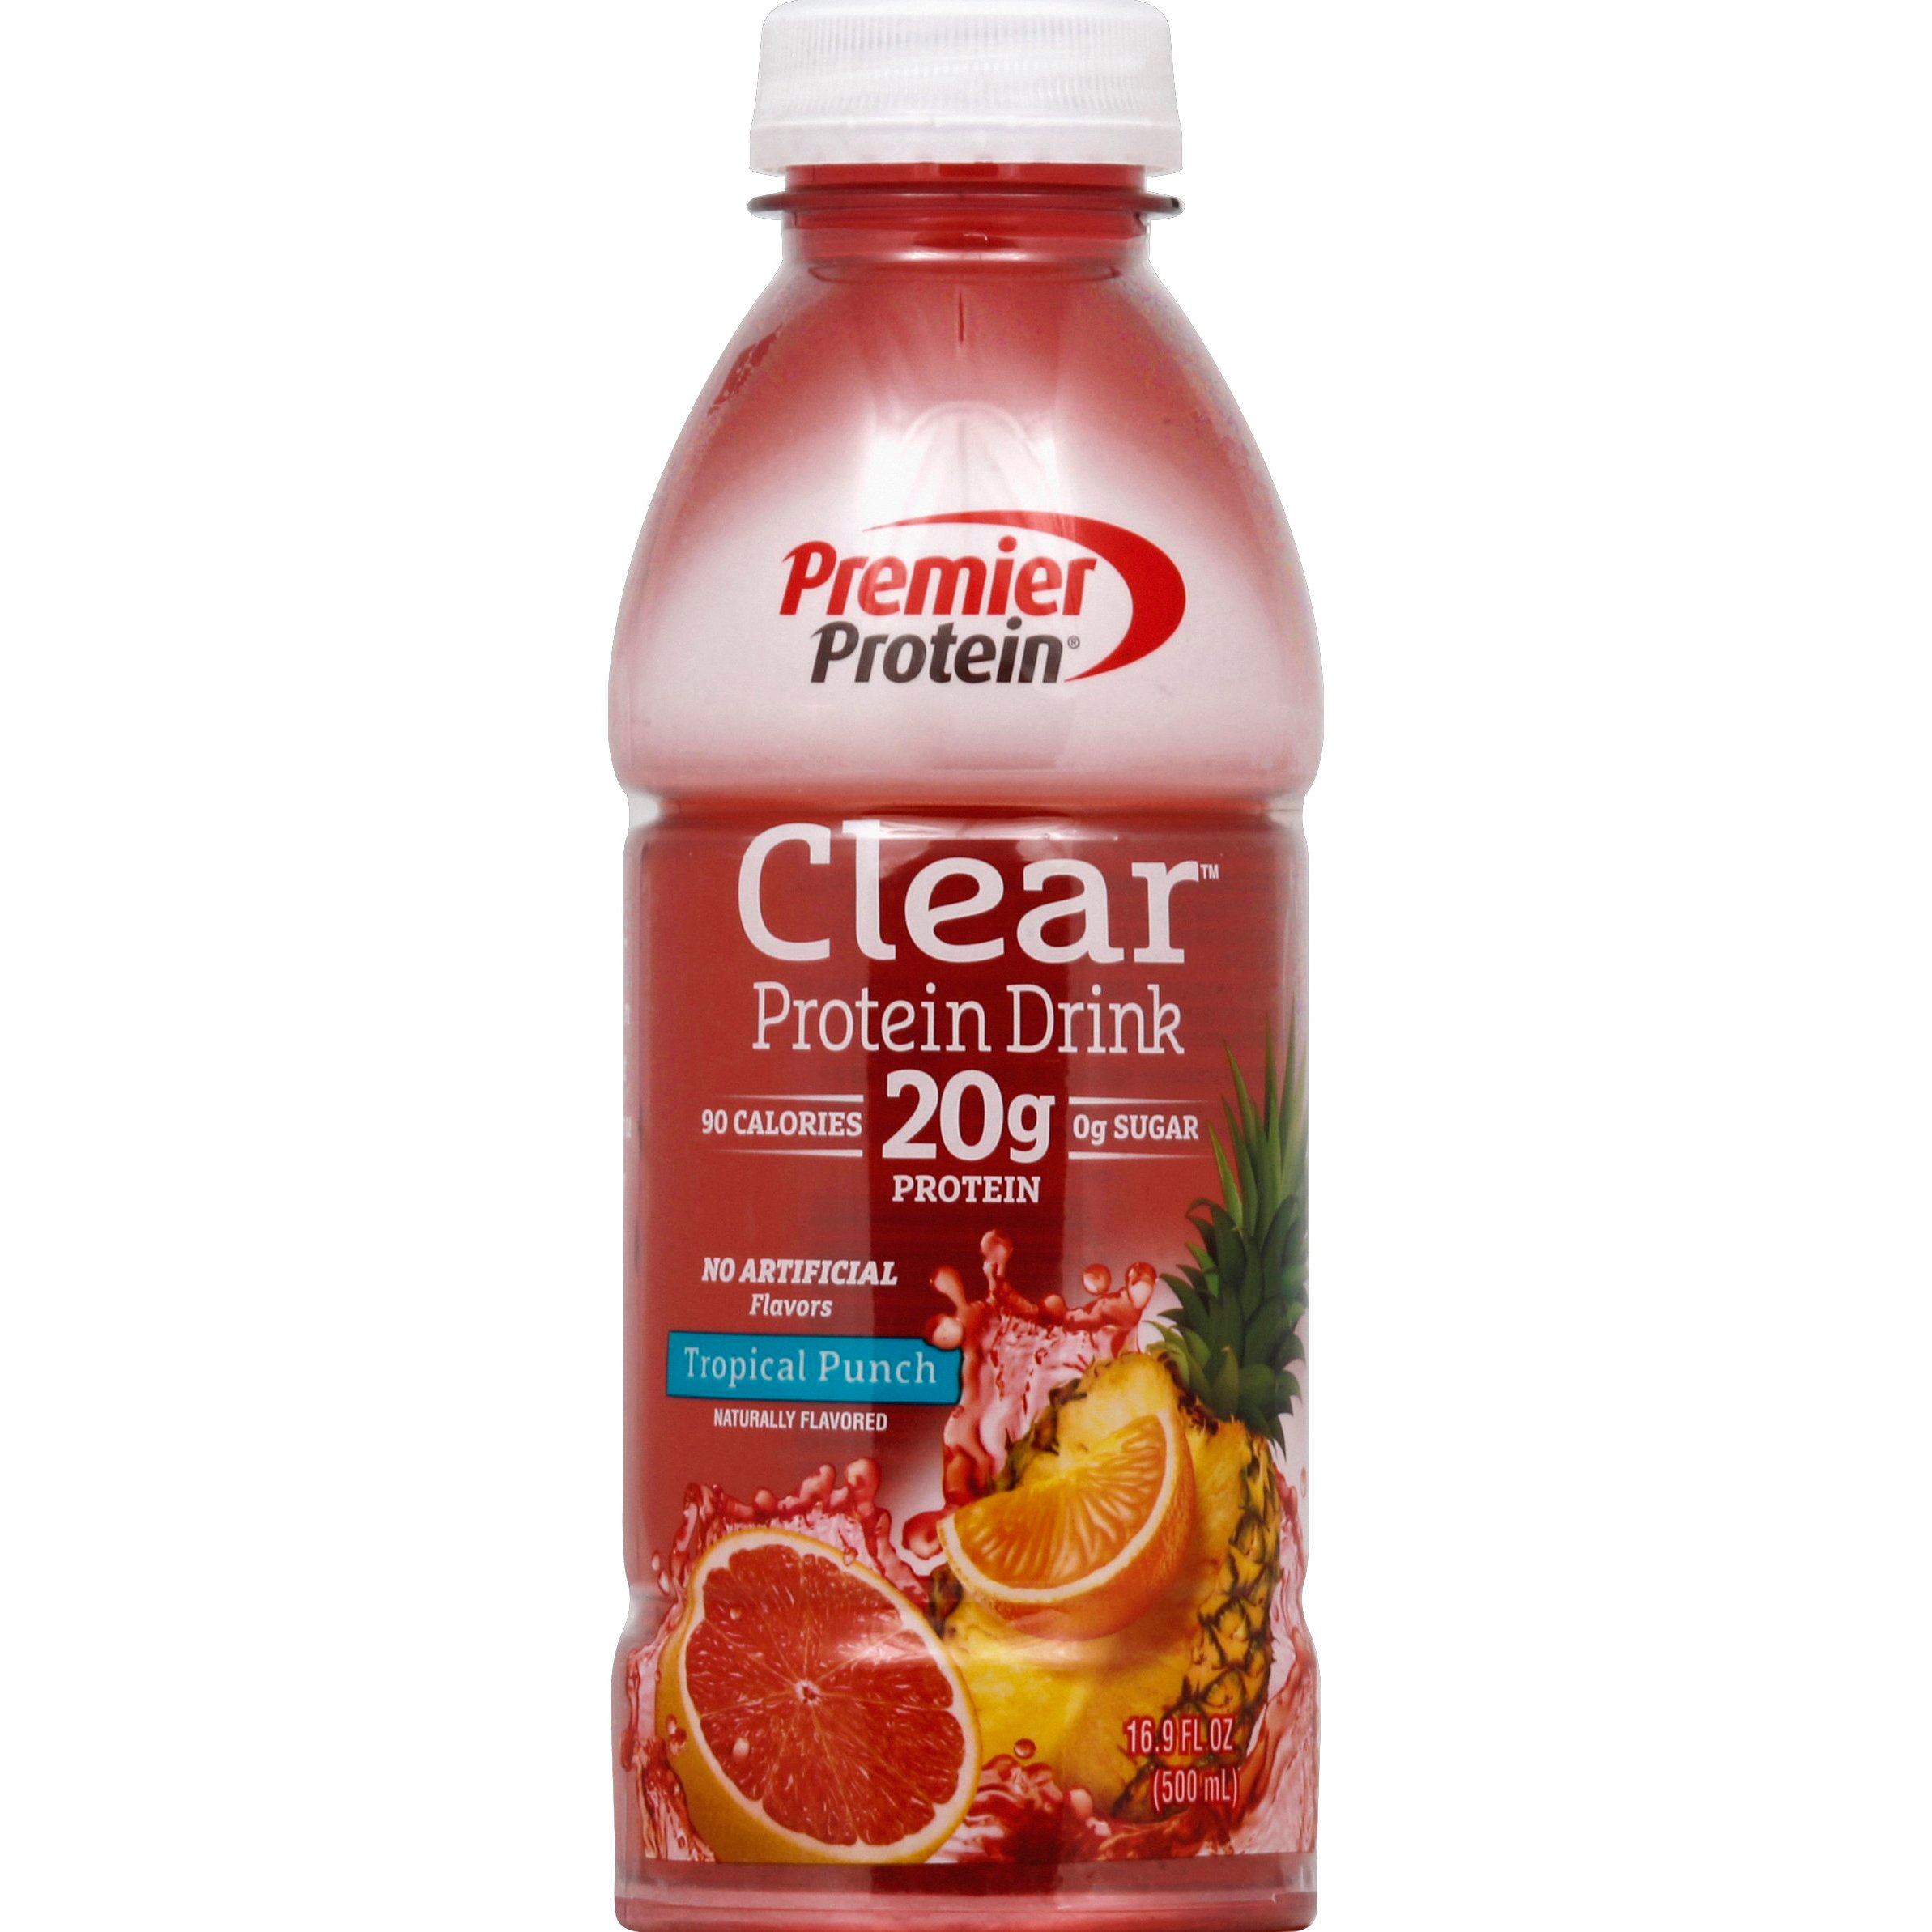 Premier Protein Clear Tropical Punch Drink - Shop Diet & Fitness